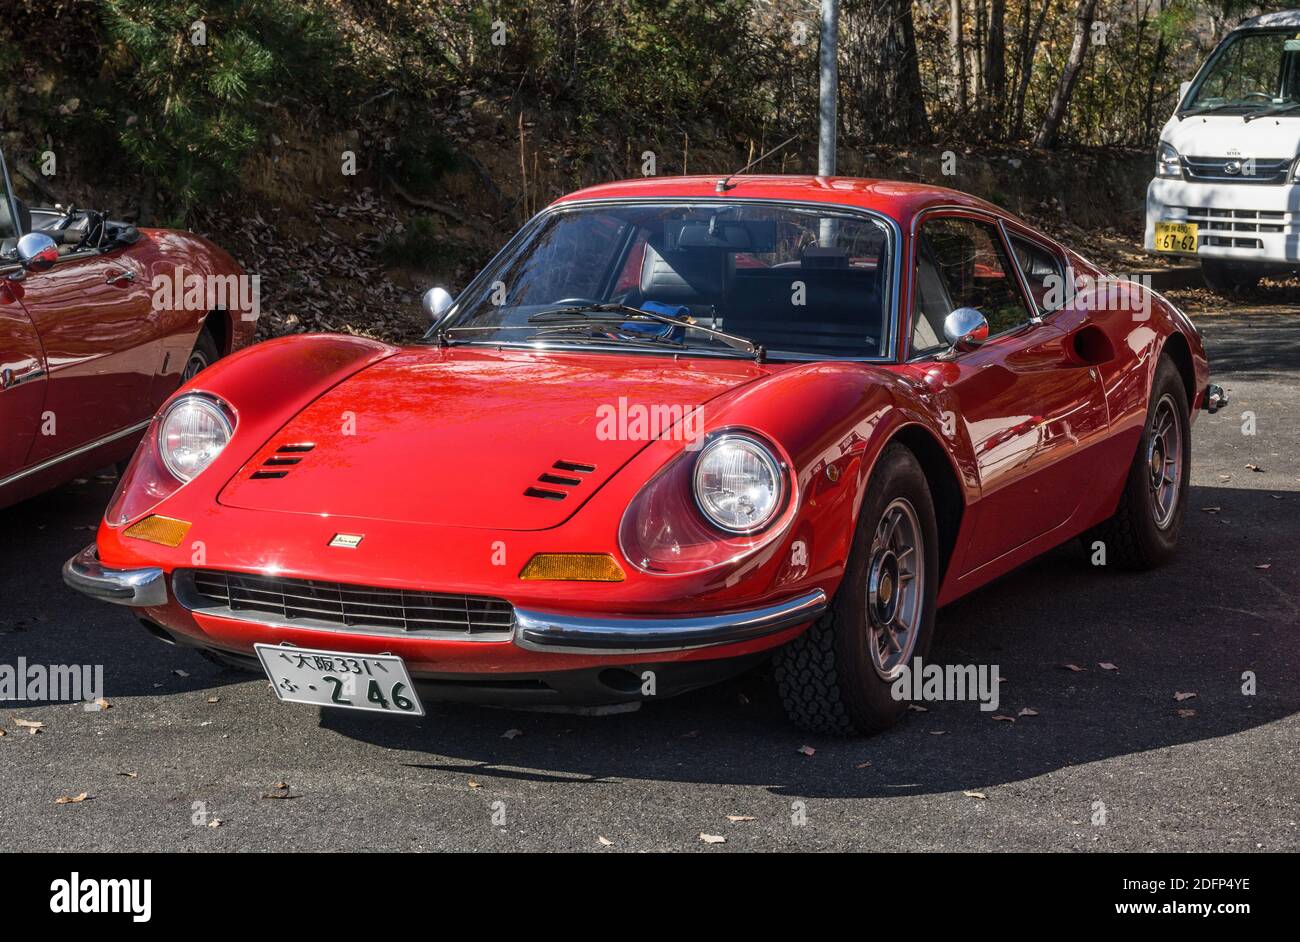 A red 1970s Ferrari Dino 246 GT small sports car parked outside in sunshine in Kyoto, Japan Stock Photo